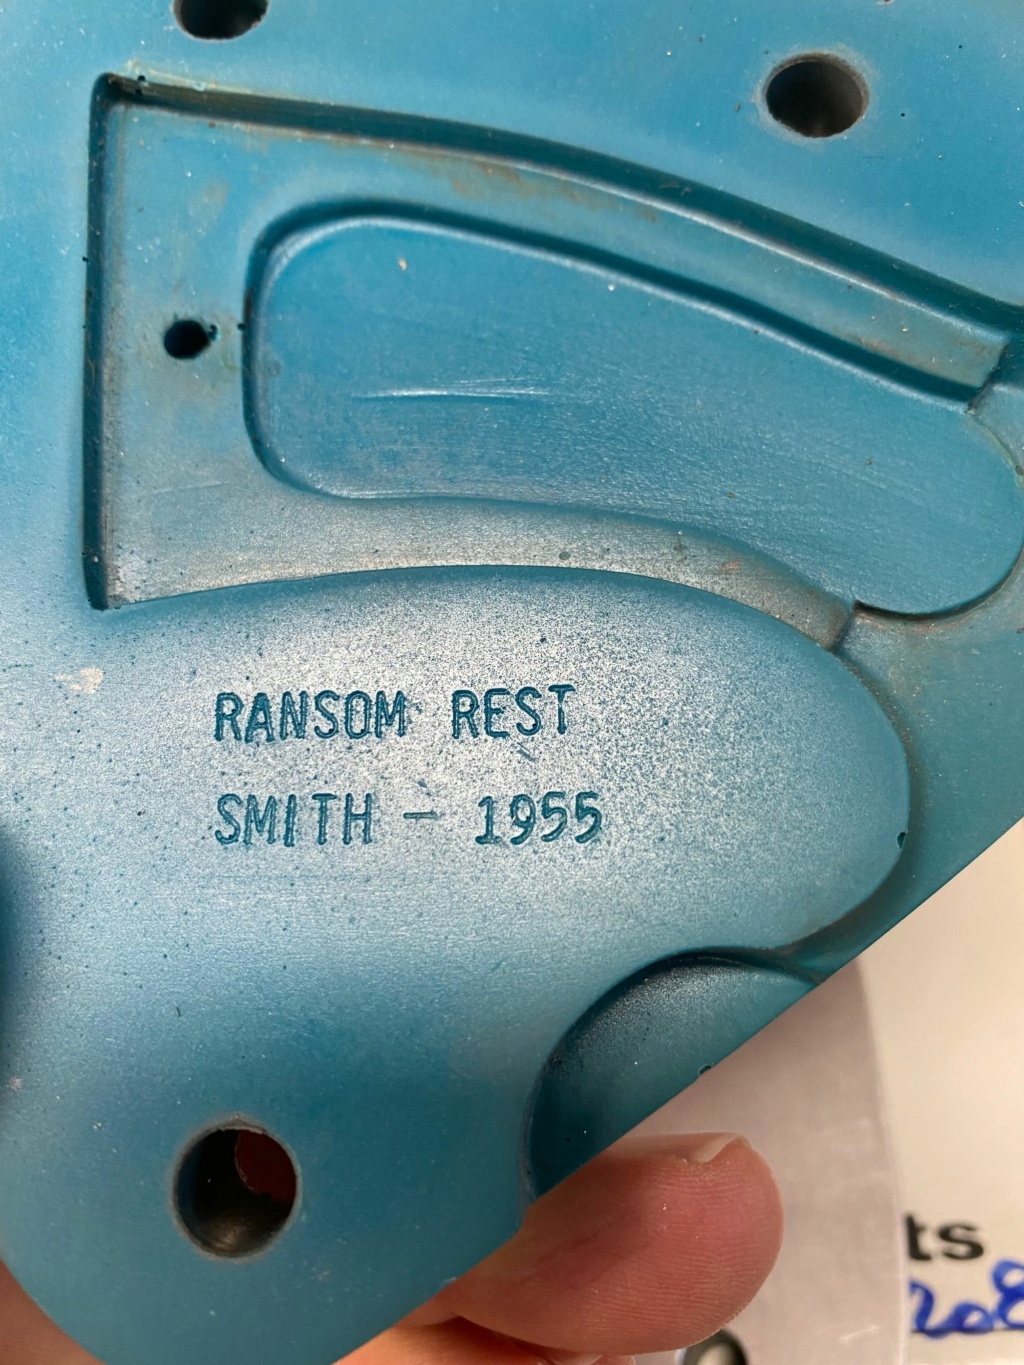 WTS: Ransom Rest Smith & Wesson N-Frame. "Smith 1955". $35.00, plus $9.95 shipping or local pickup.    2022-022